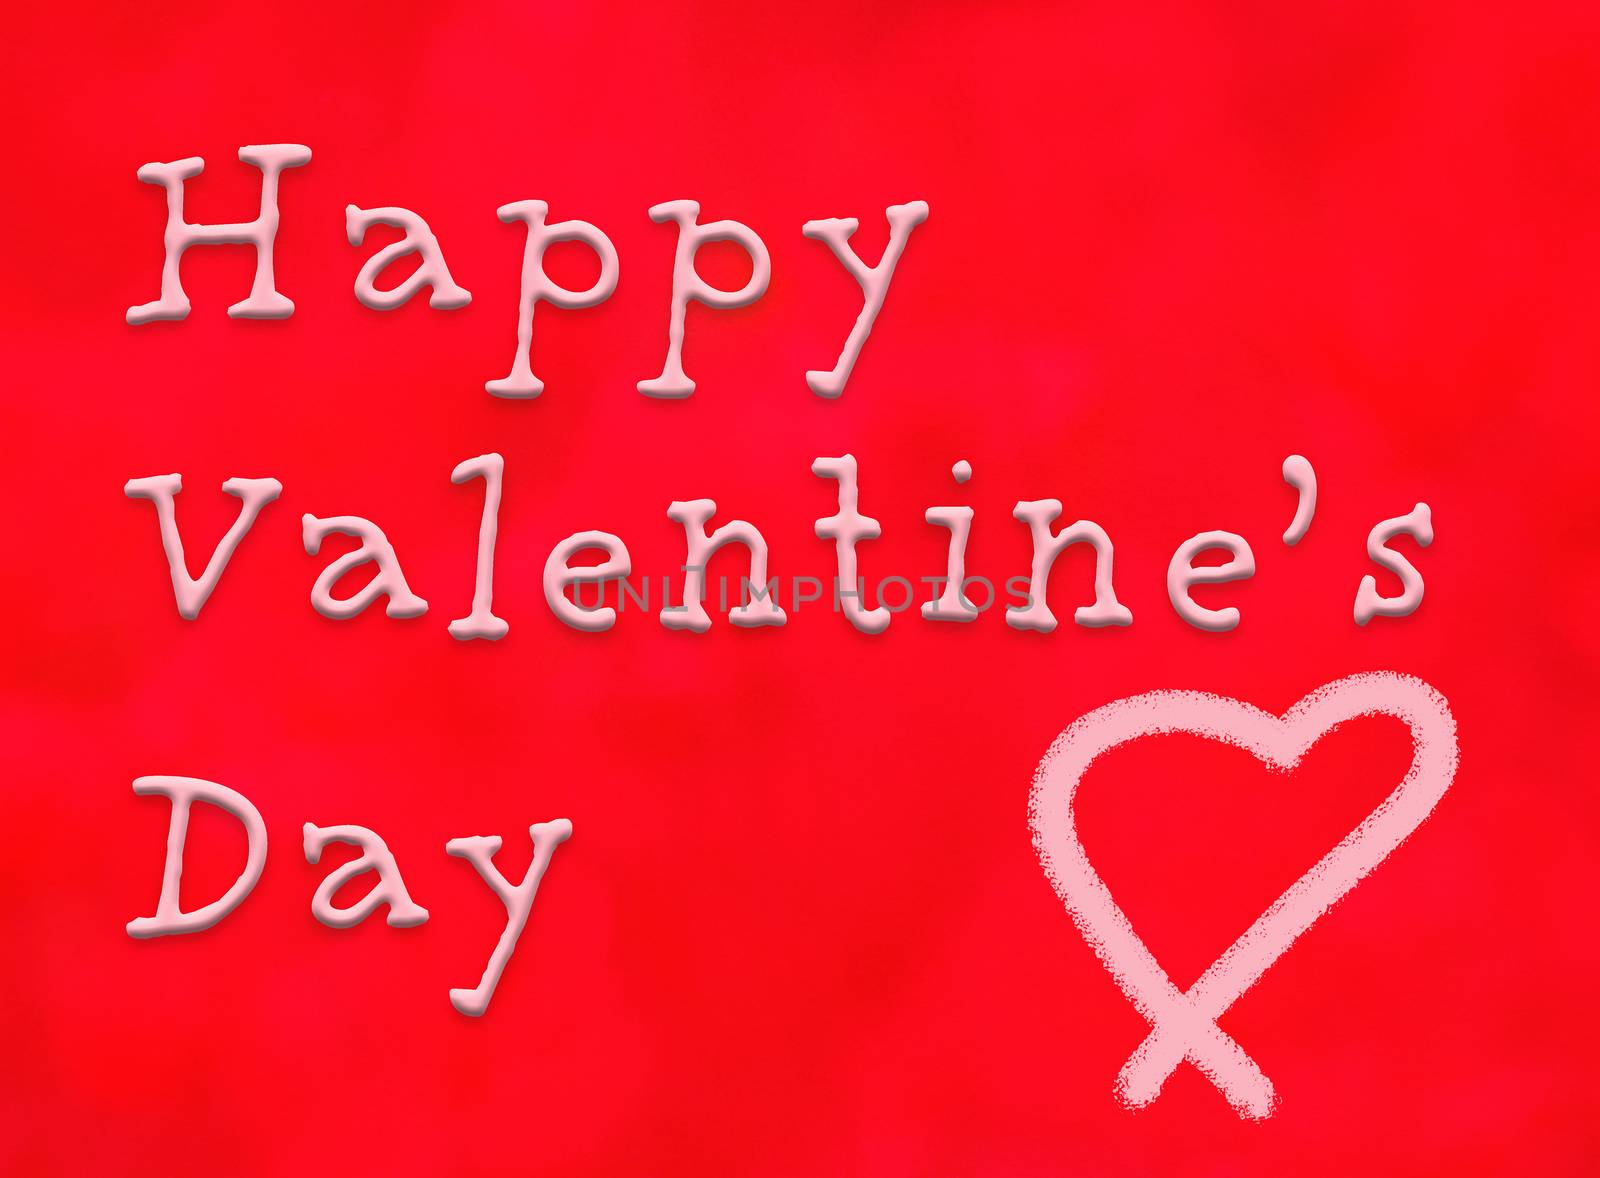 Happy Valentine's Day cursive text on red background with pink heart signifying romance